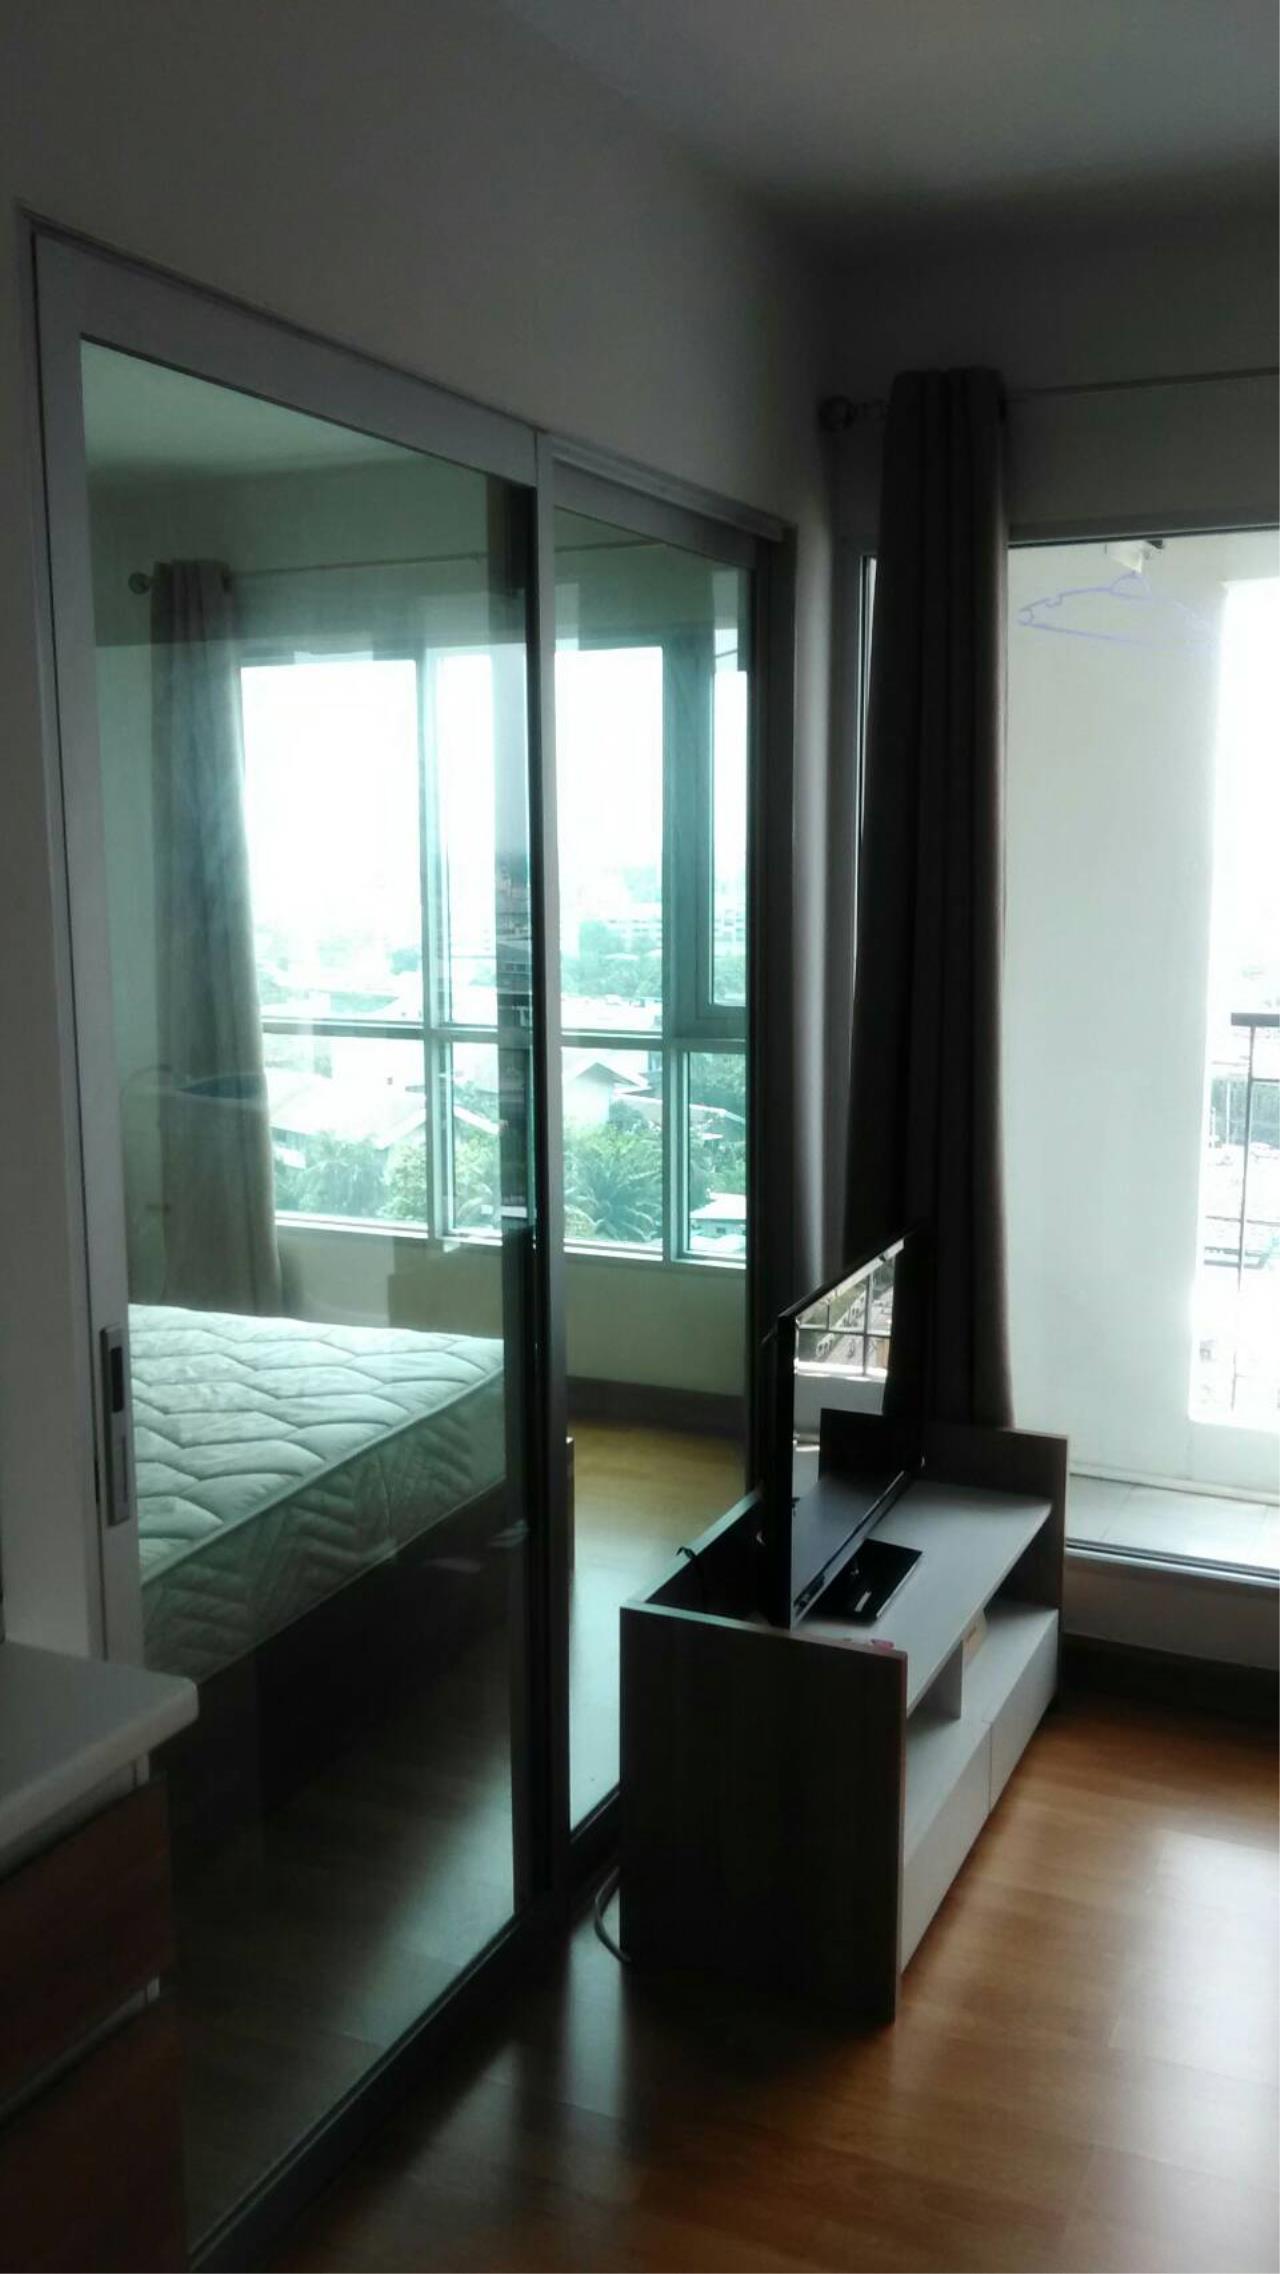 RE/MAX All Star Realty Agency's Aspire Rama4 Ekamai for sale/rent one bed 1